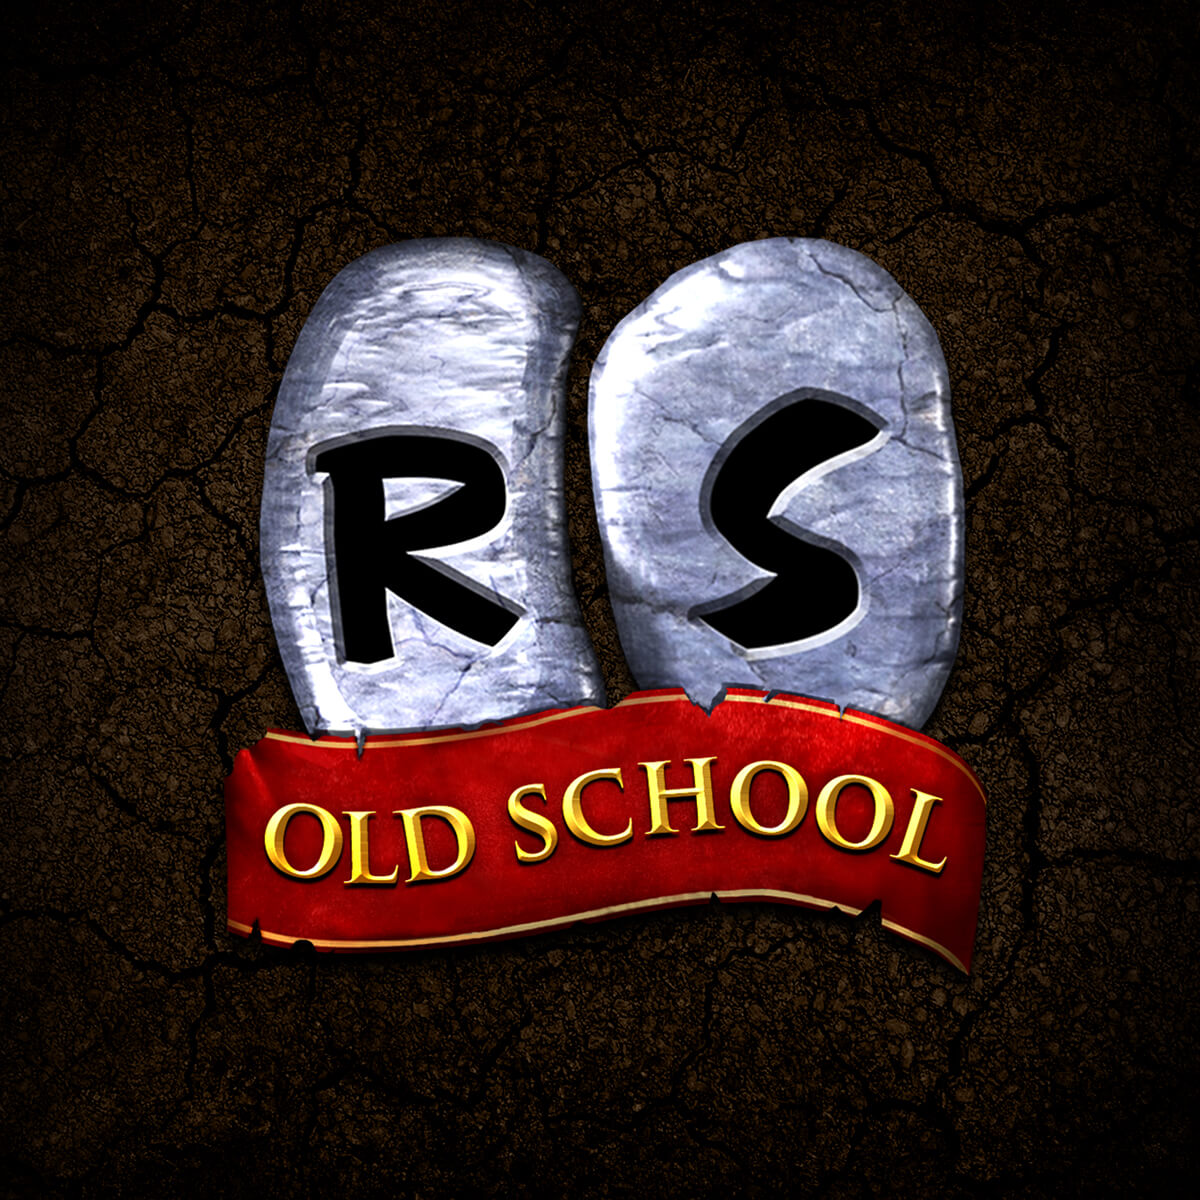 Old School RuneScape Download: Role-Playing Game Online Match